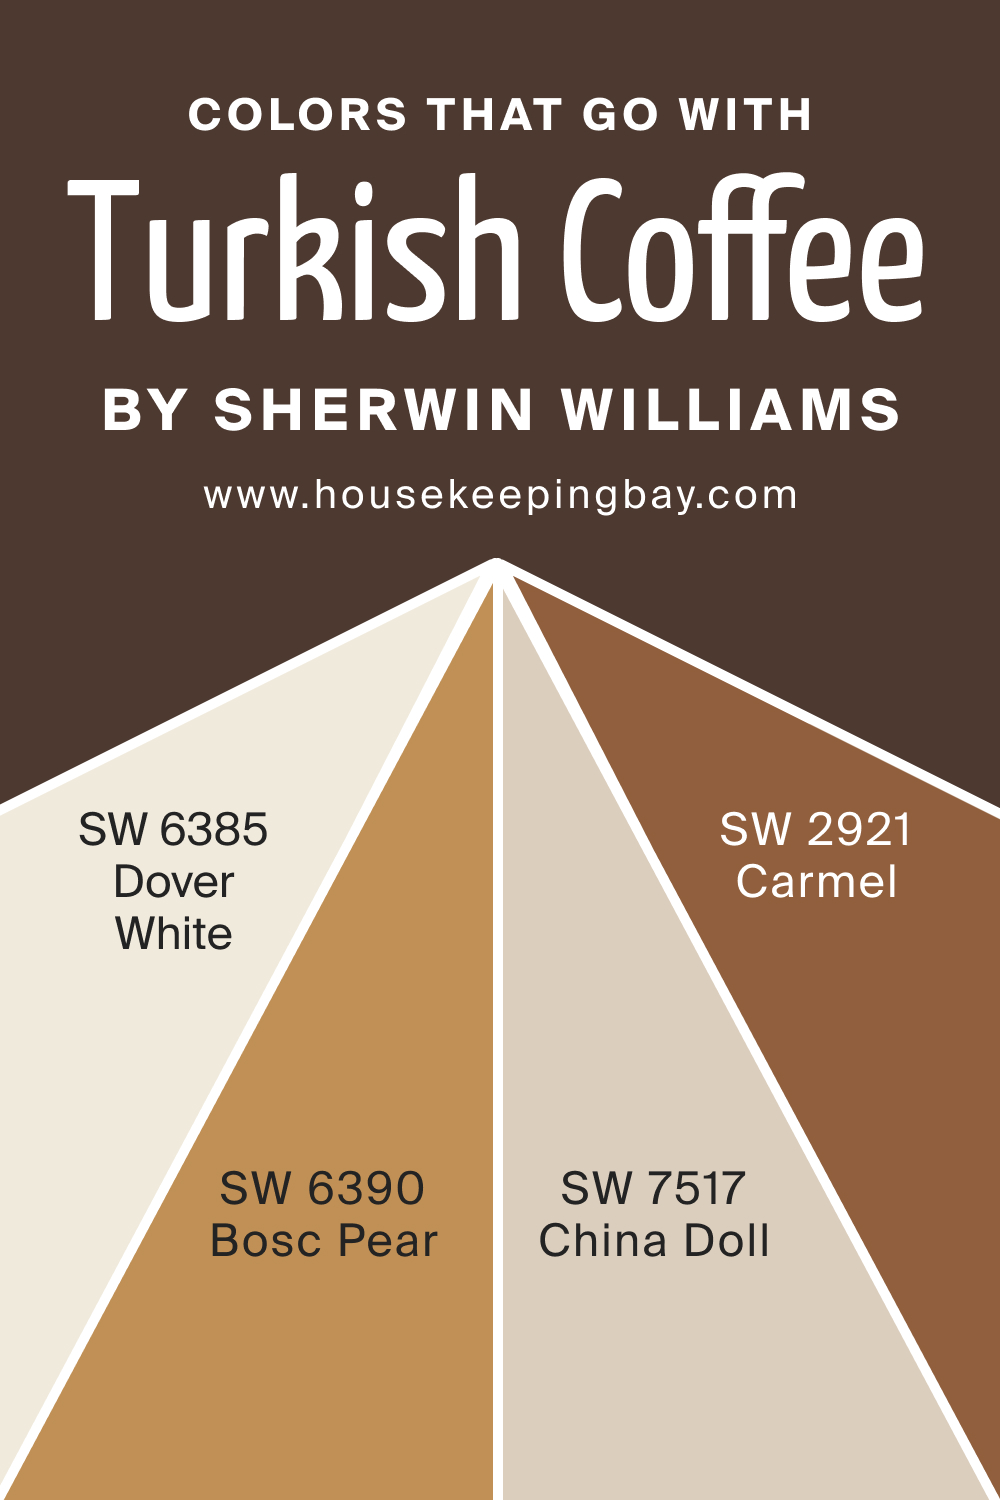 Colors that goes with SW 6076 Turkish Coffee by Sherwin Williams